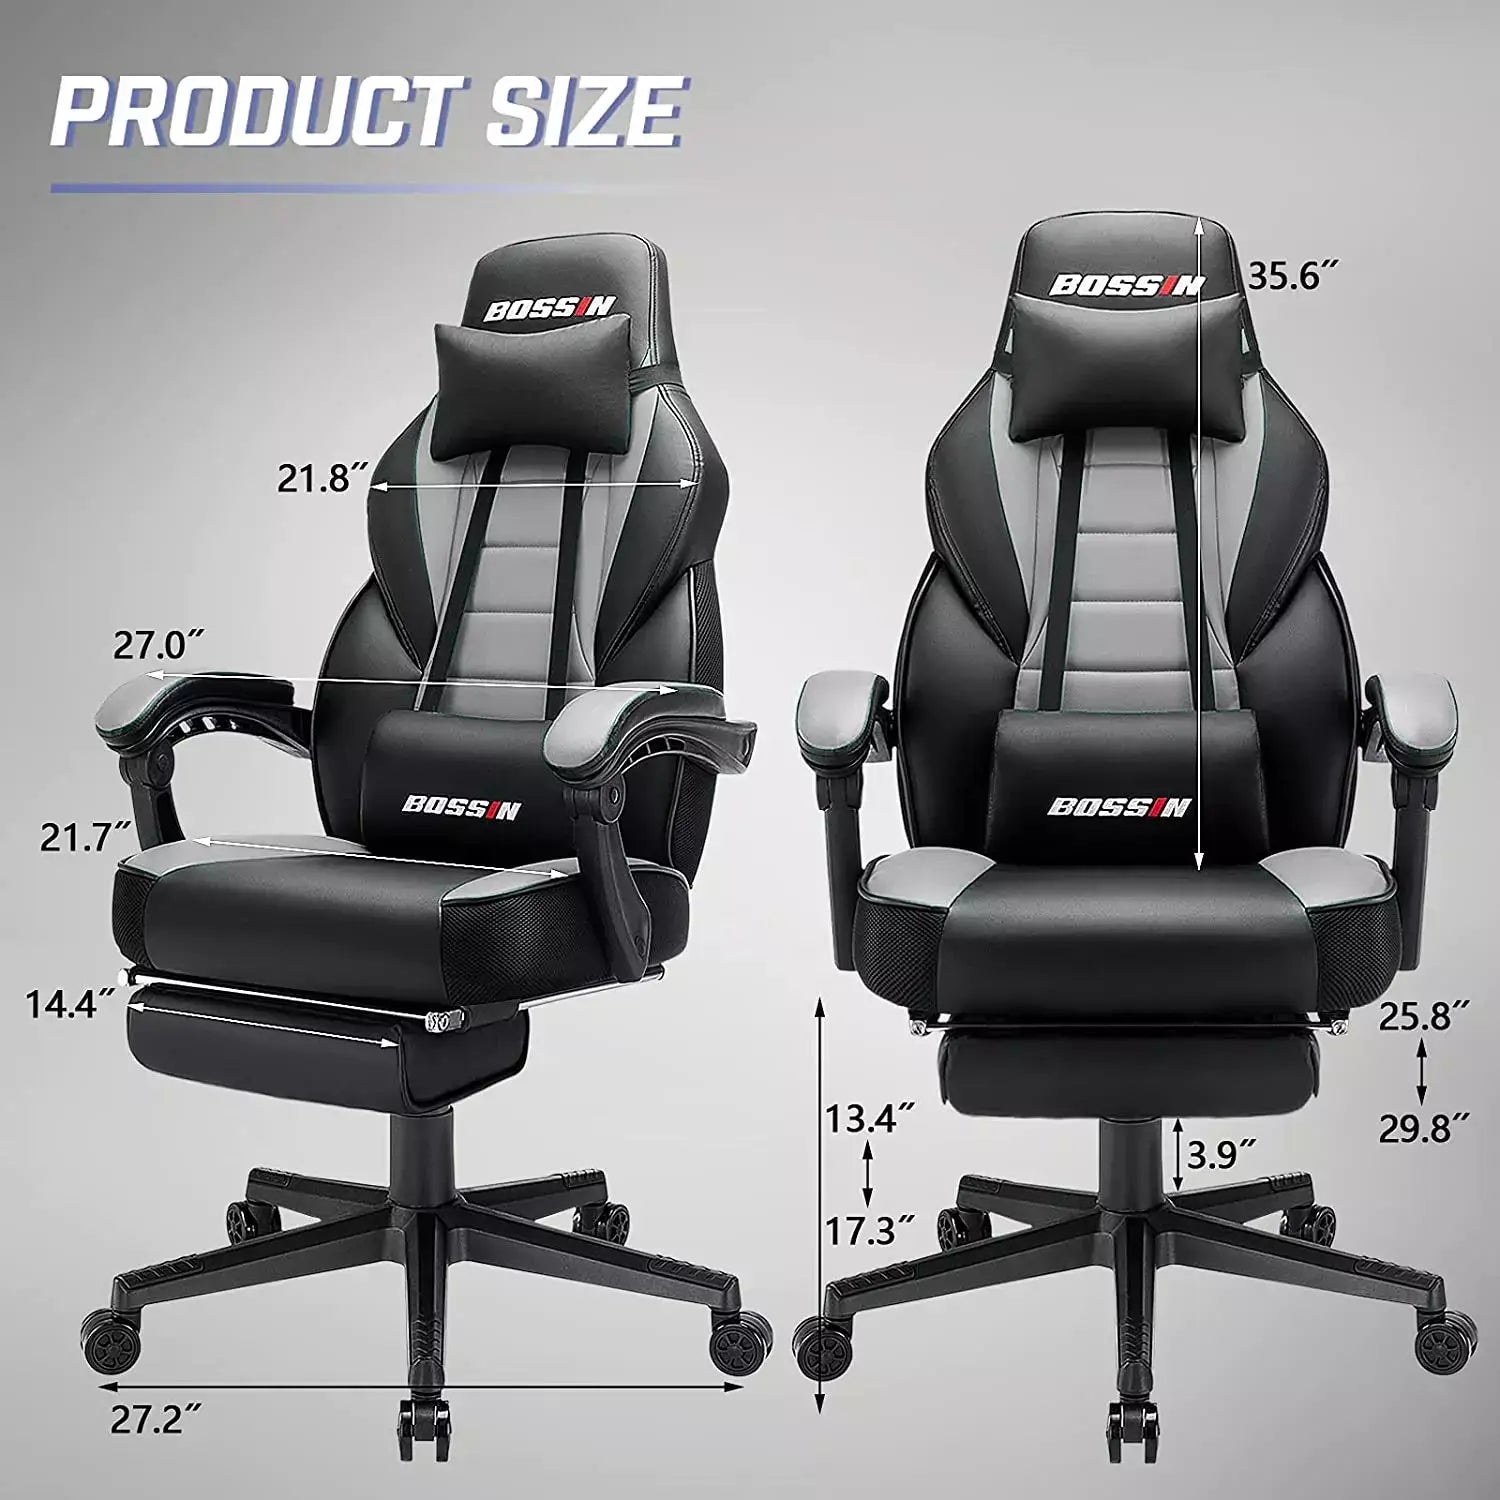 BOSSIN Heavy Duty Massage PC Gaming Chair with Footrest, Design for Big Guy BGC01